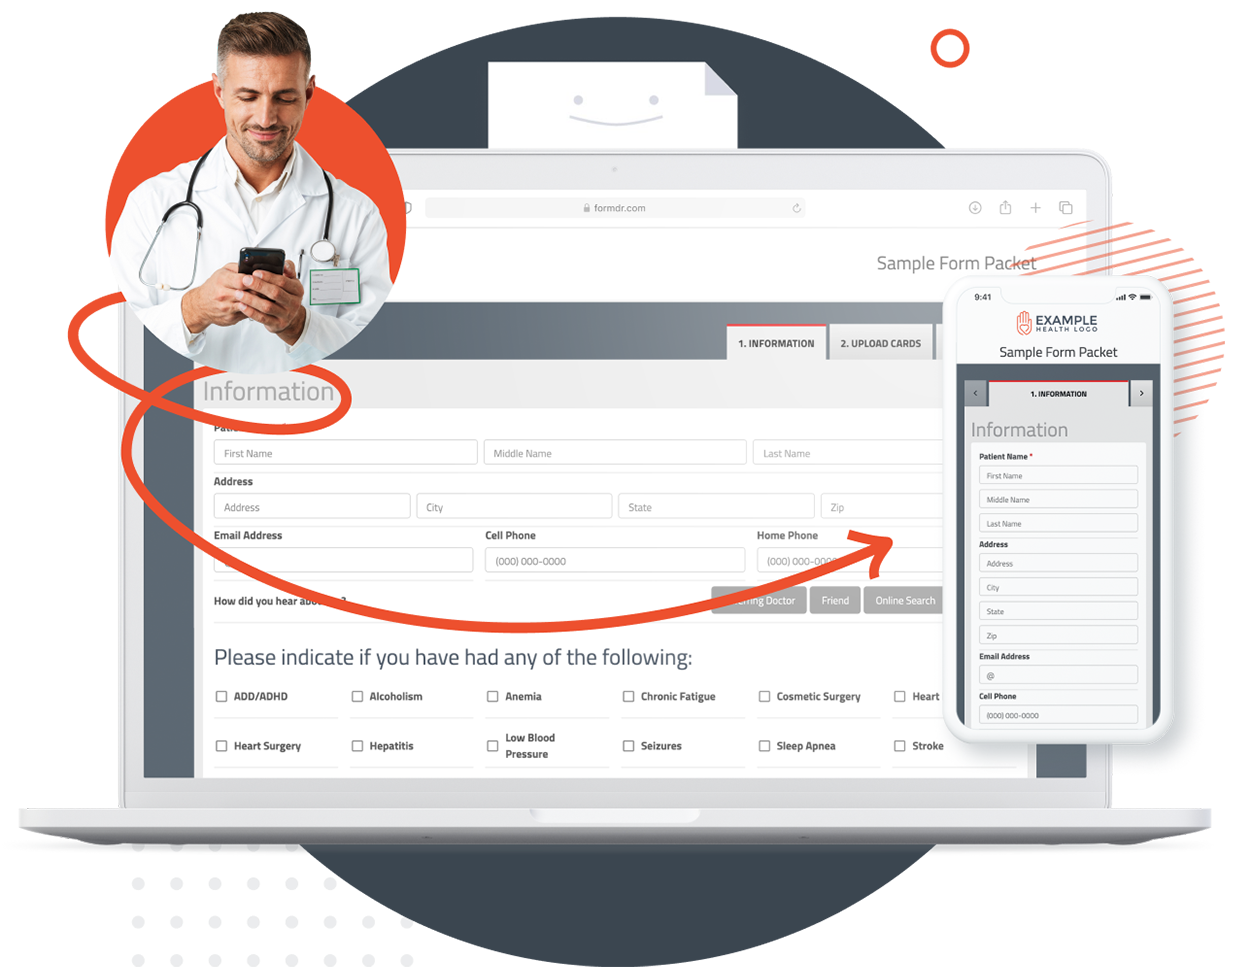 Mobile-Friendly HIPAA Compliant Forms